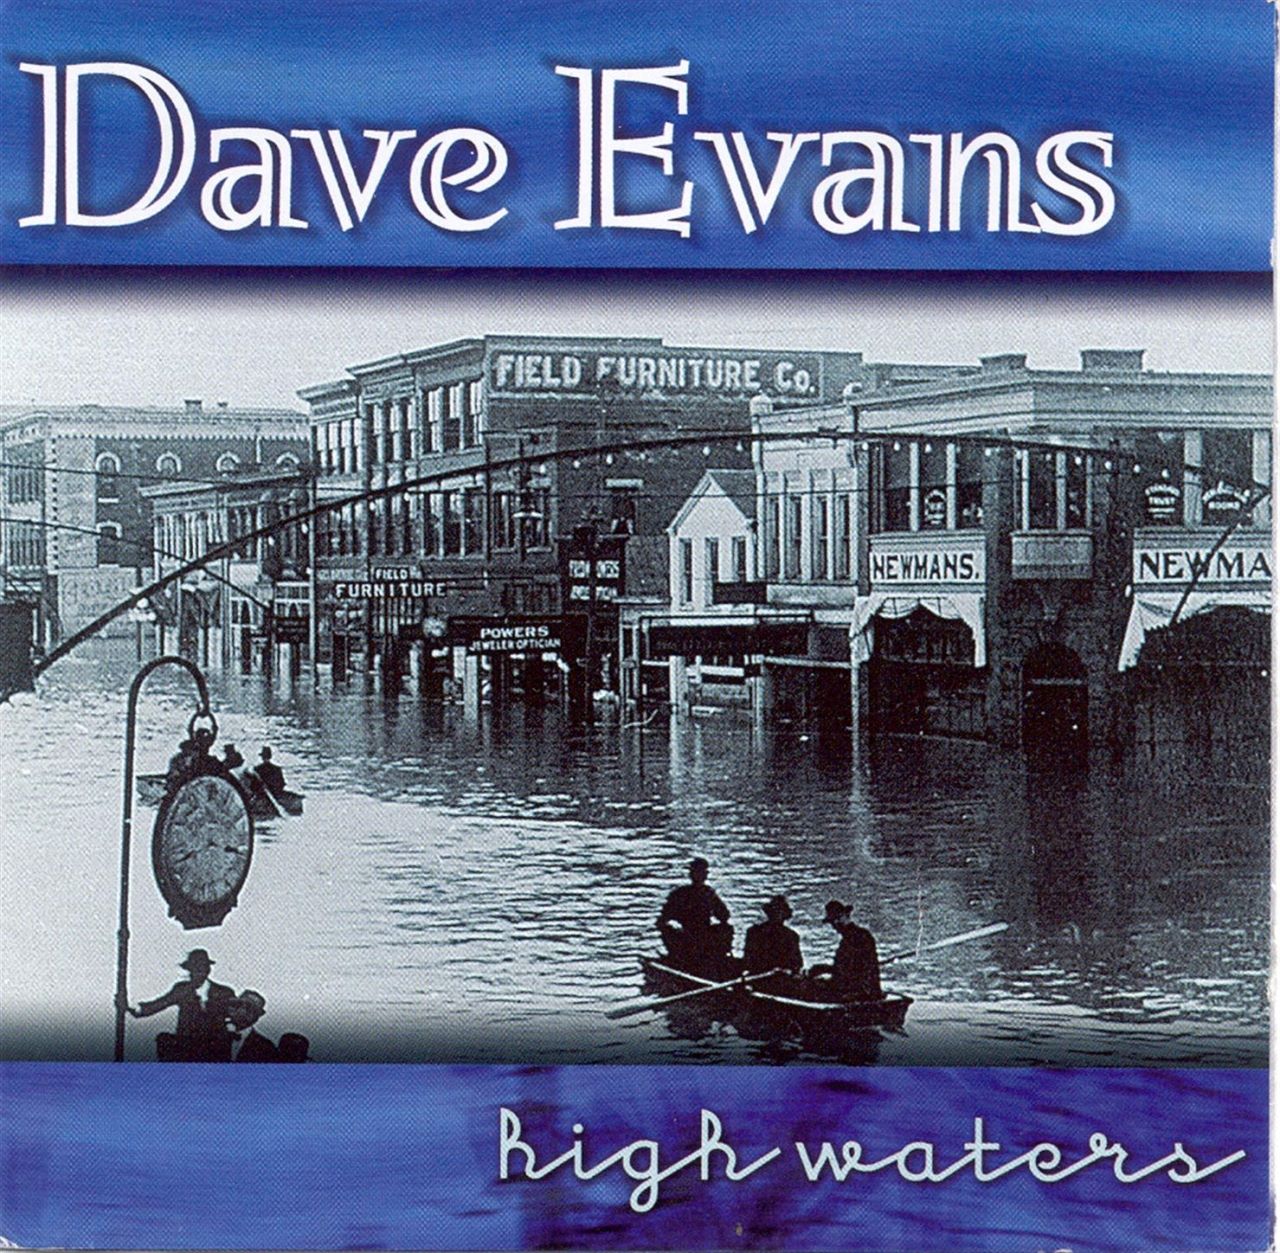 Dave Evans - High Waters cover album